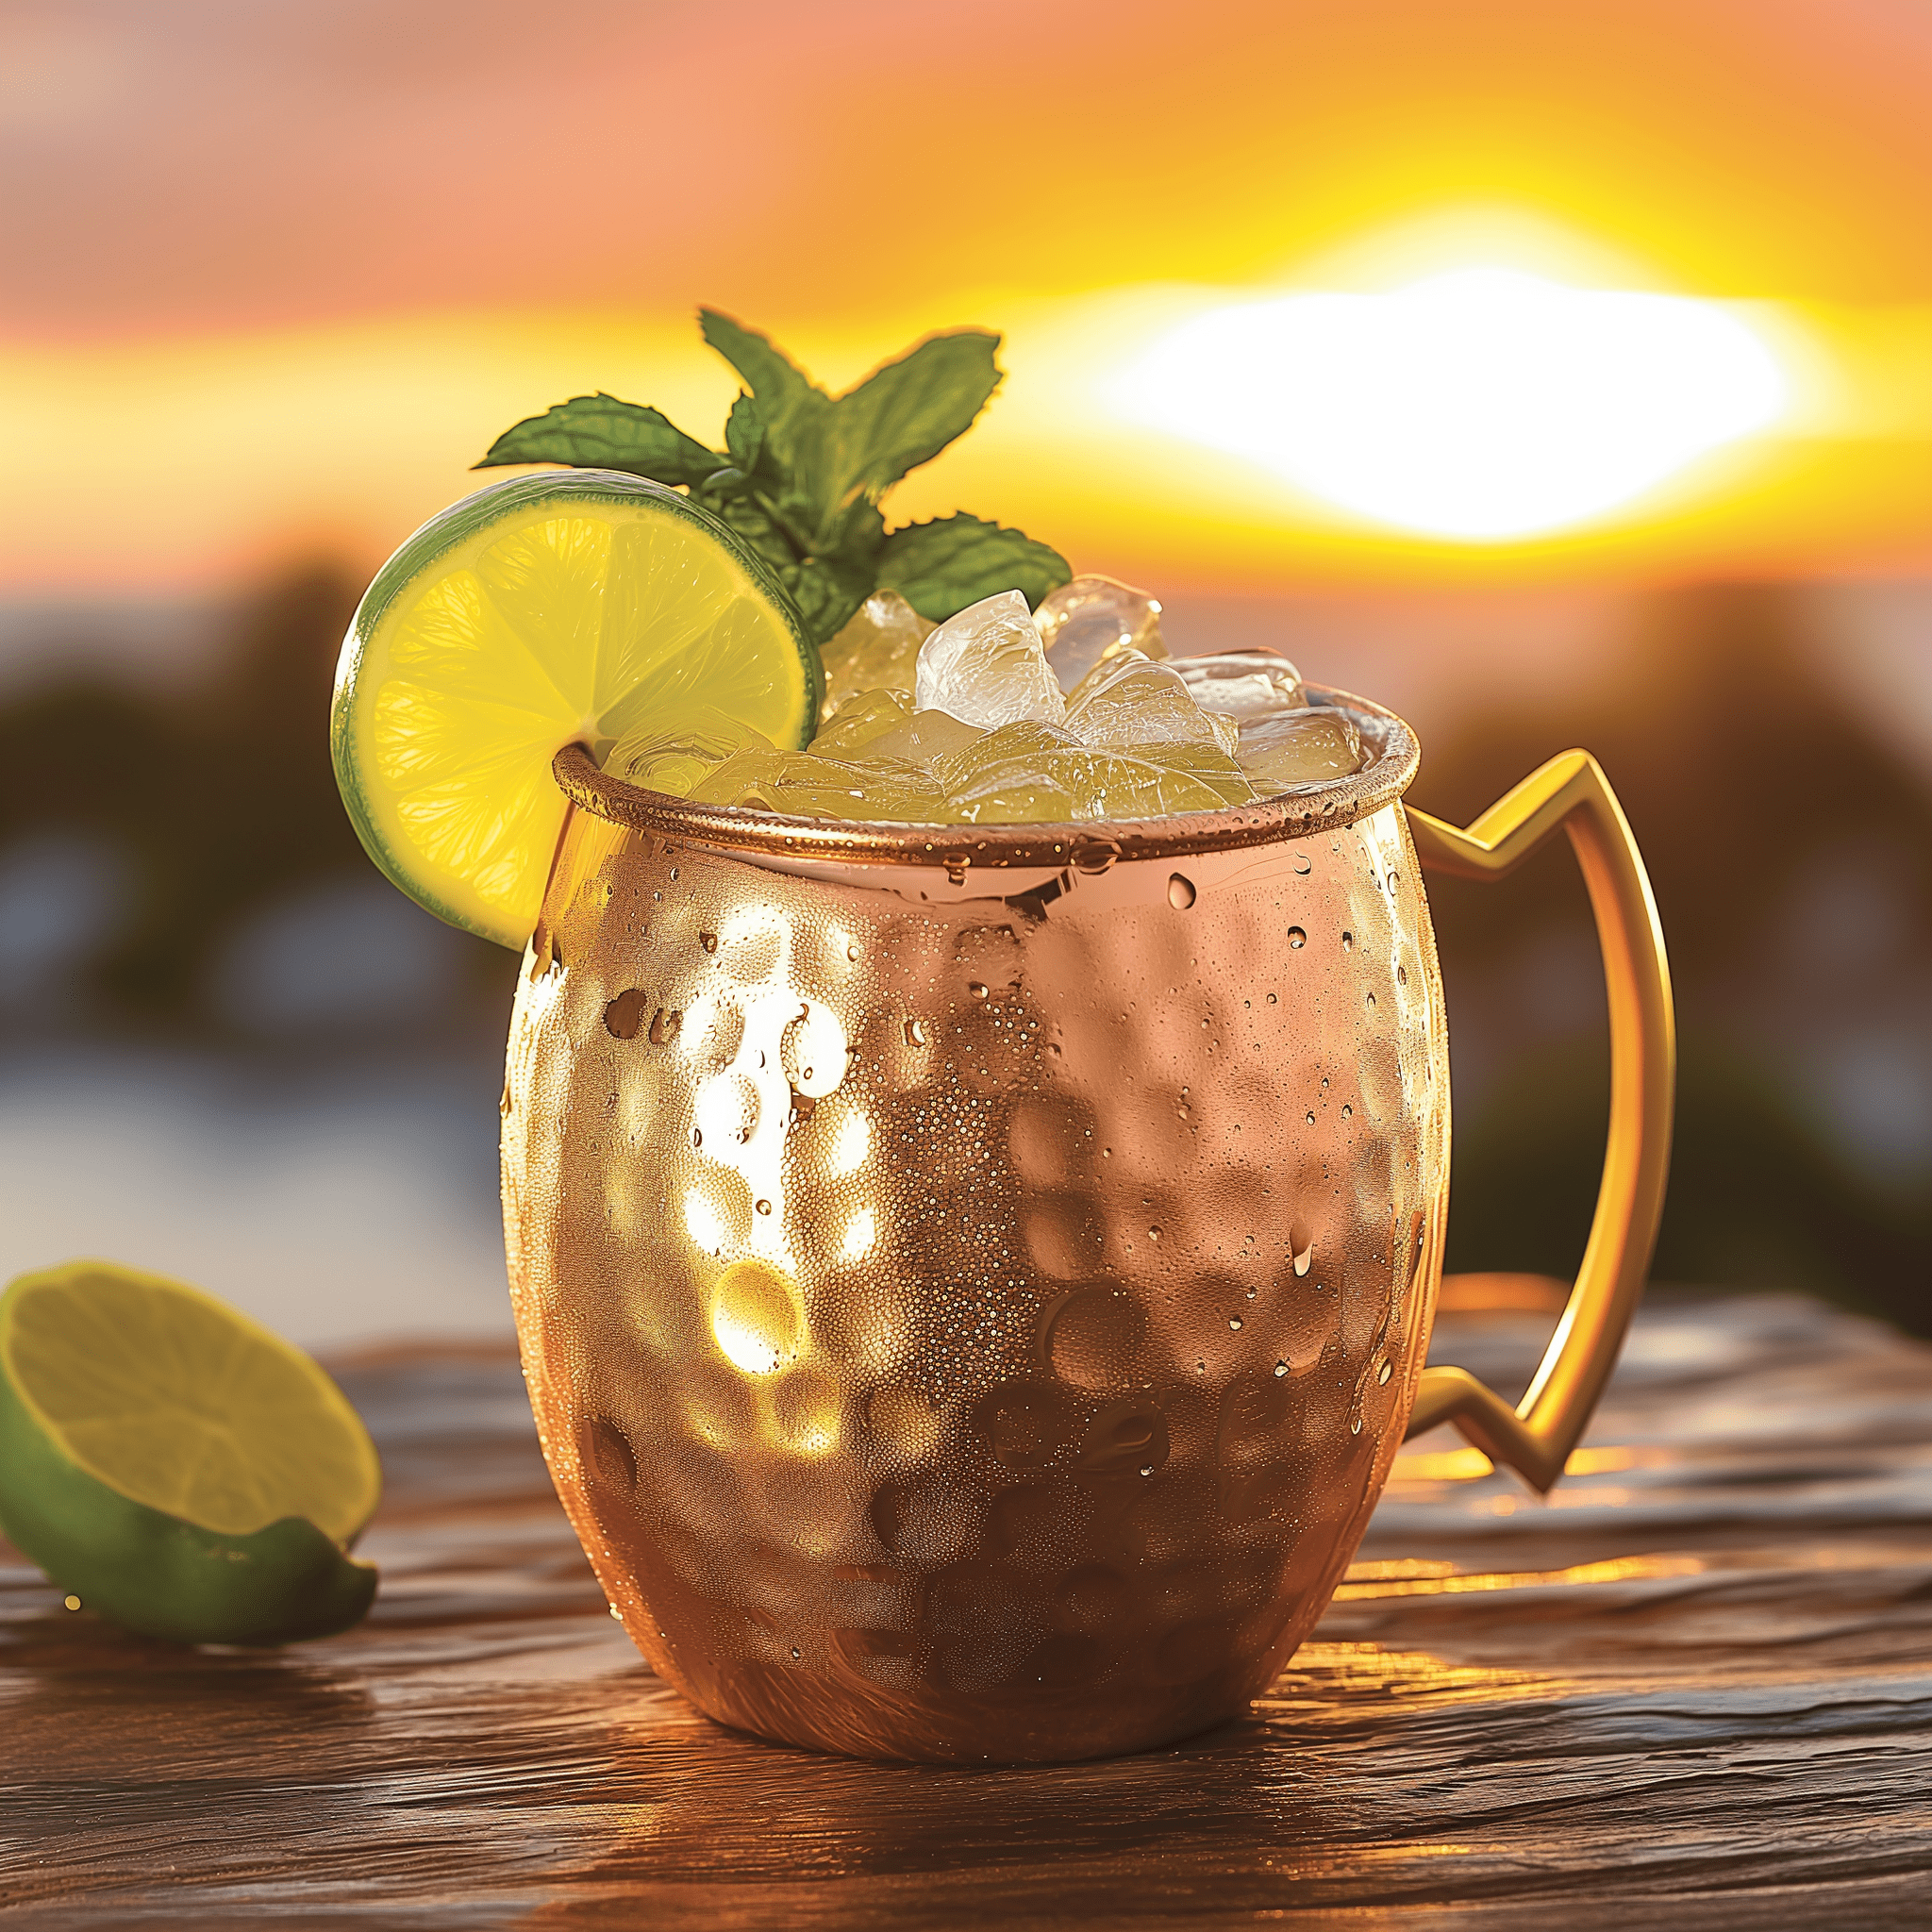 Brazilian Mule Cocktail Recipe - The Brazilian Mule offers a spicy ginger kick balanced with the smooth, slightly sweet and grassy notes of cachaça. The lime juice adds a necessary tang, making it a refreshing, zesty, and invigorating drink.